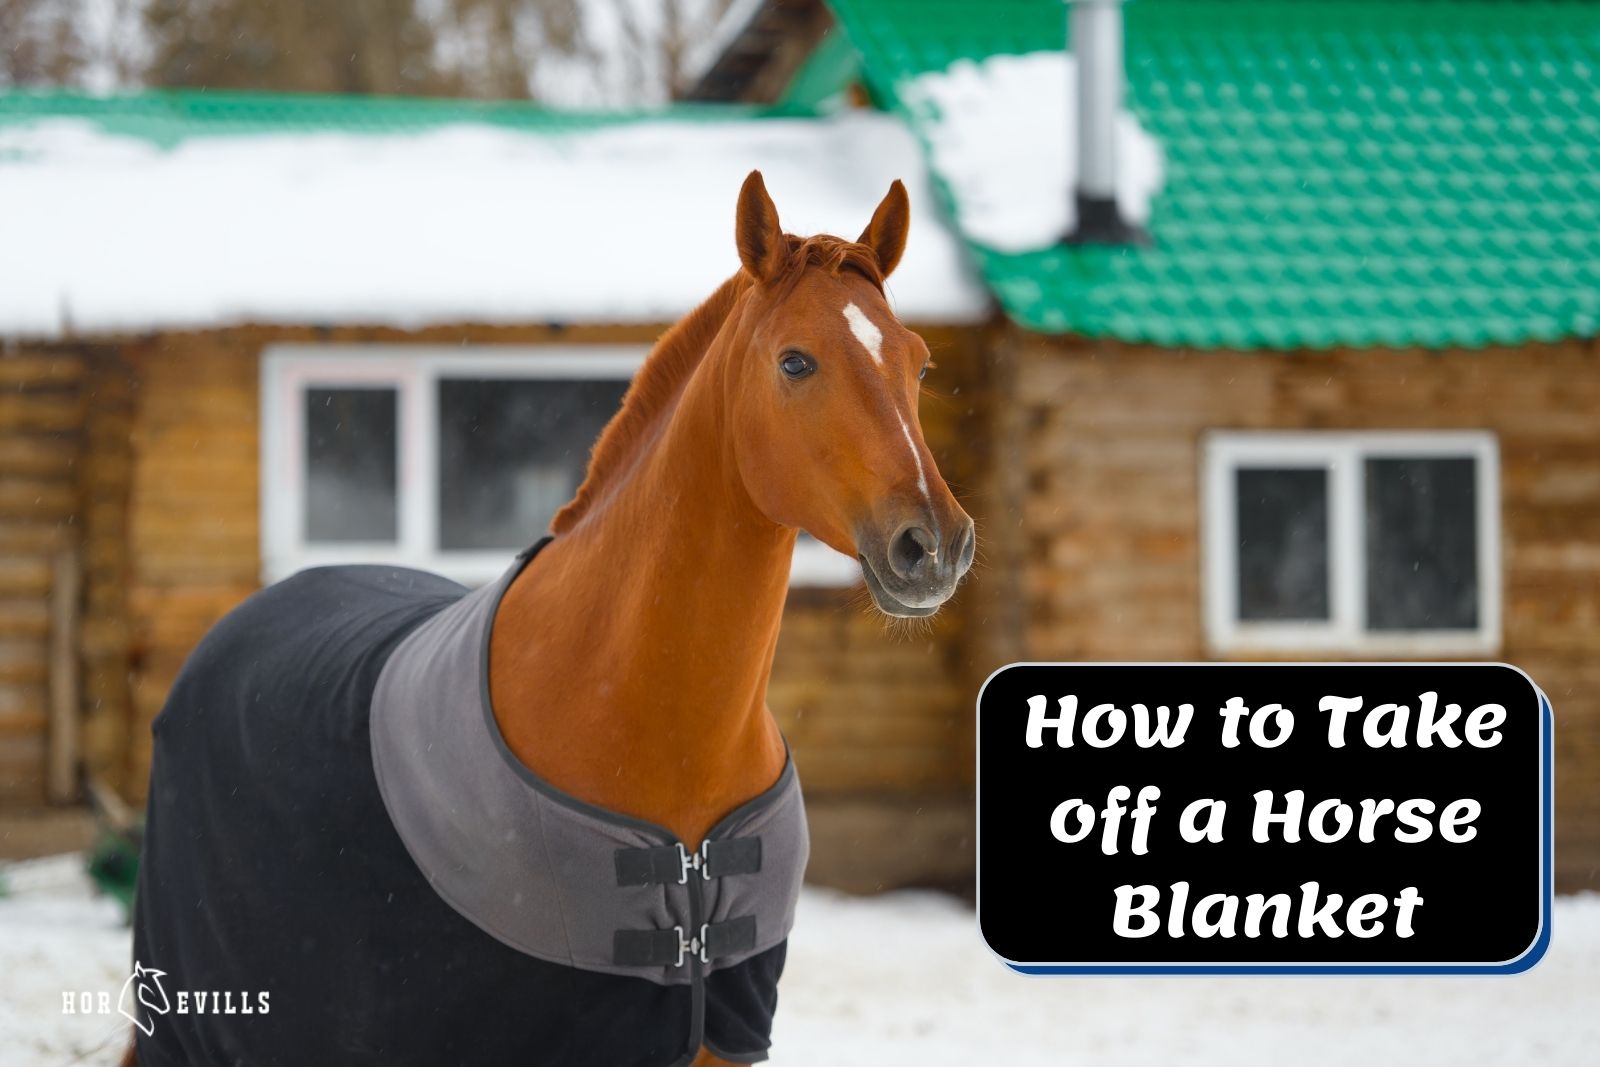 chestnut horse beside "How to Take off a Horse Blanket" text